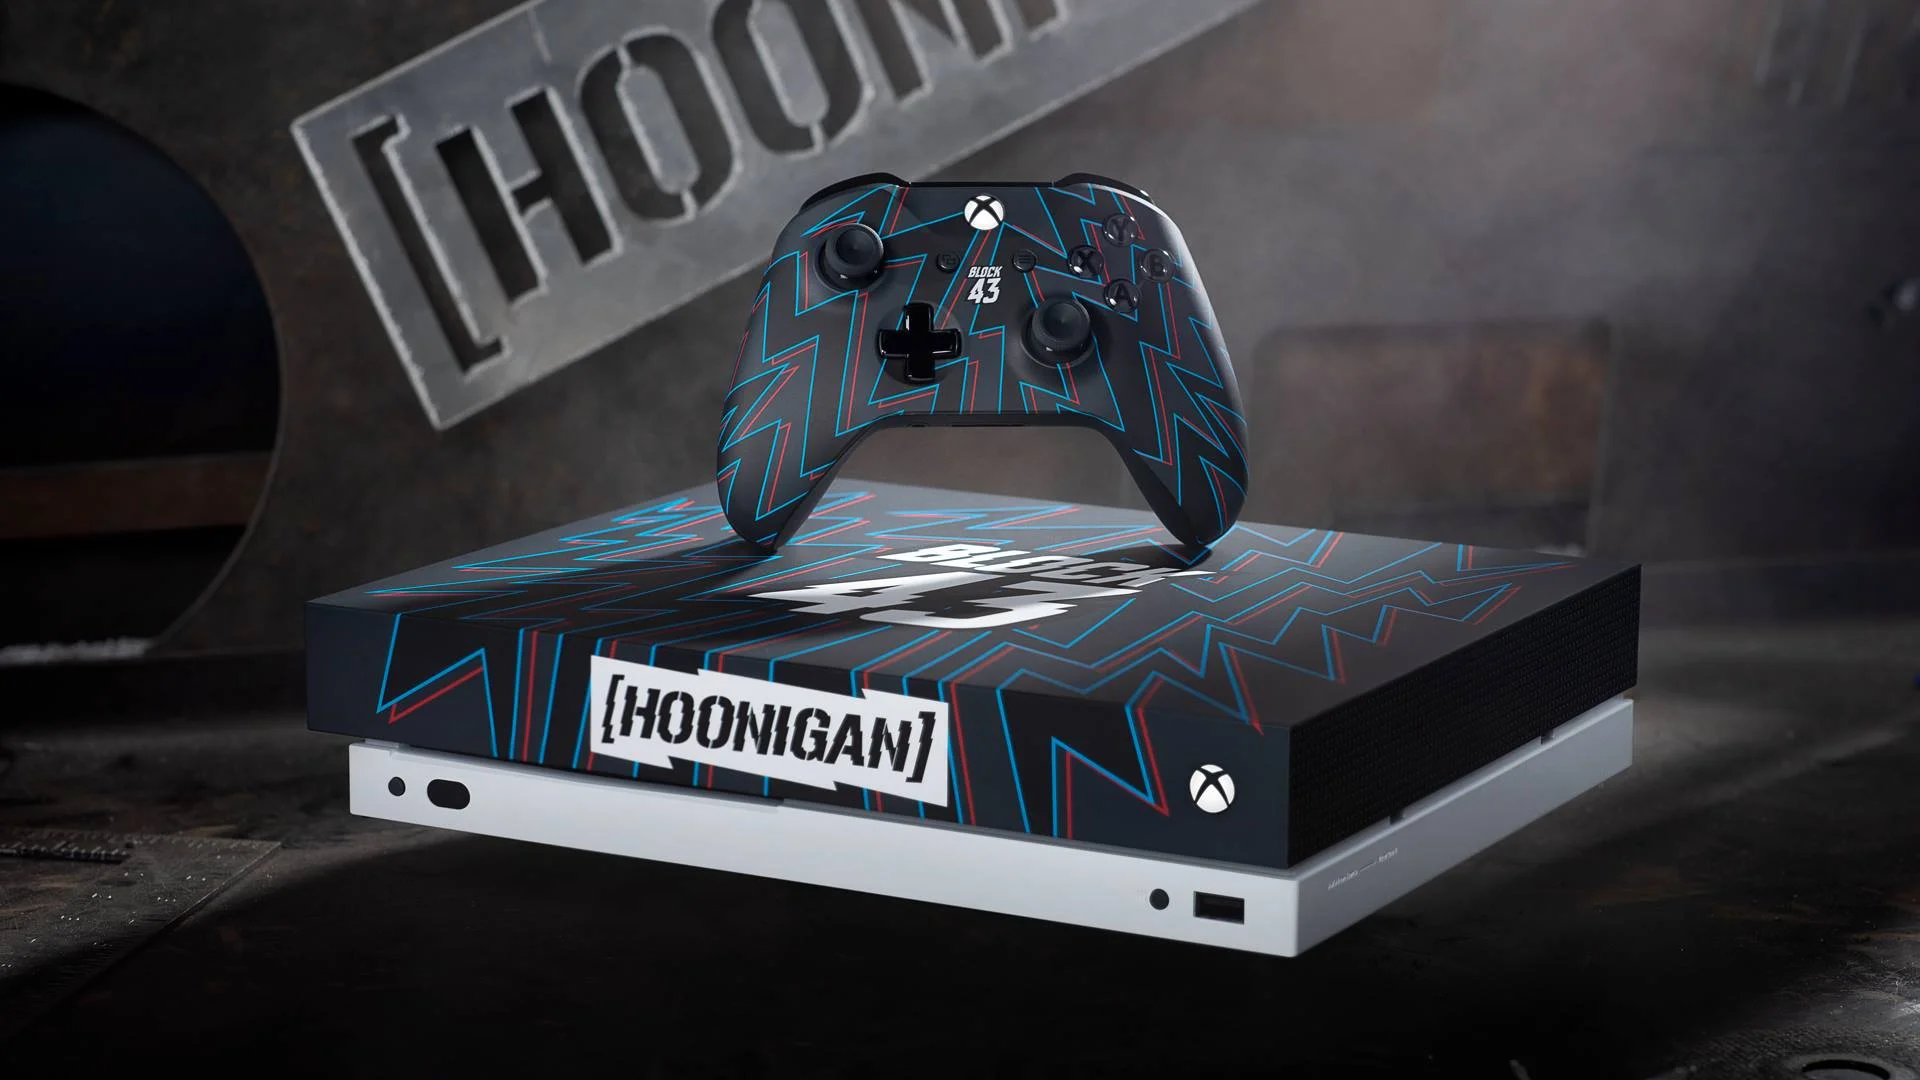  Microsoft Xbox One X Hoonigan Block 43 Black and Blue/Red Console